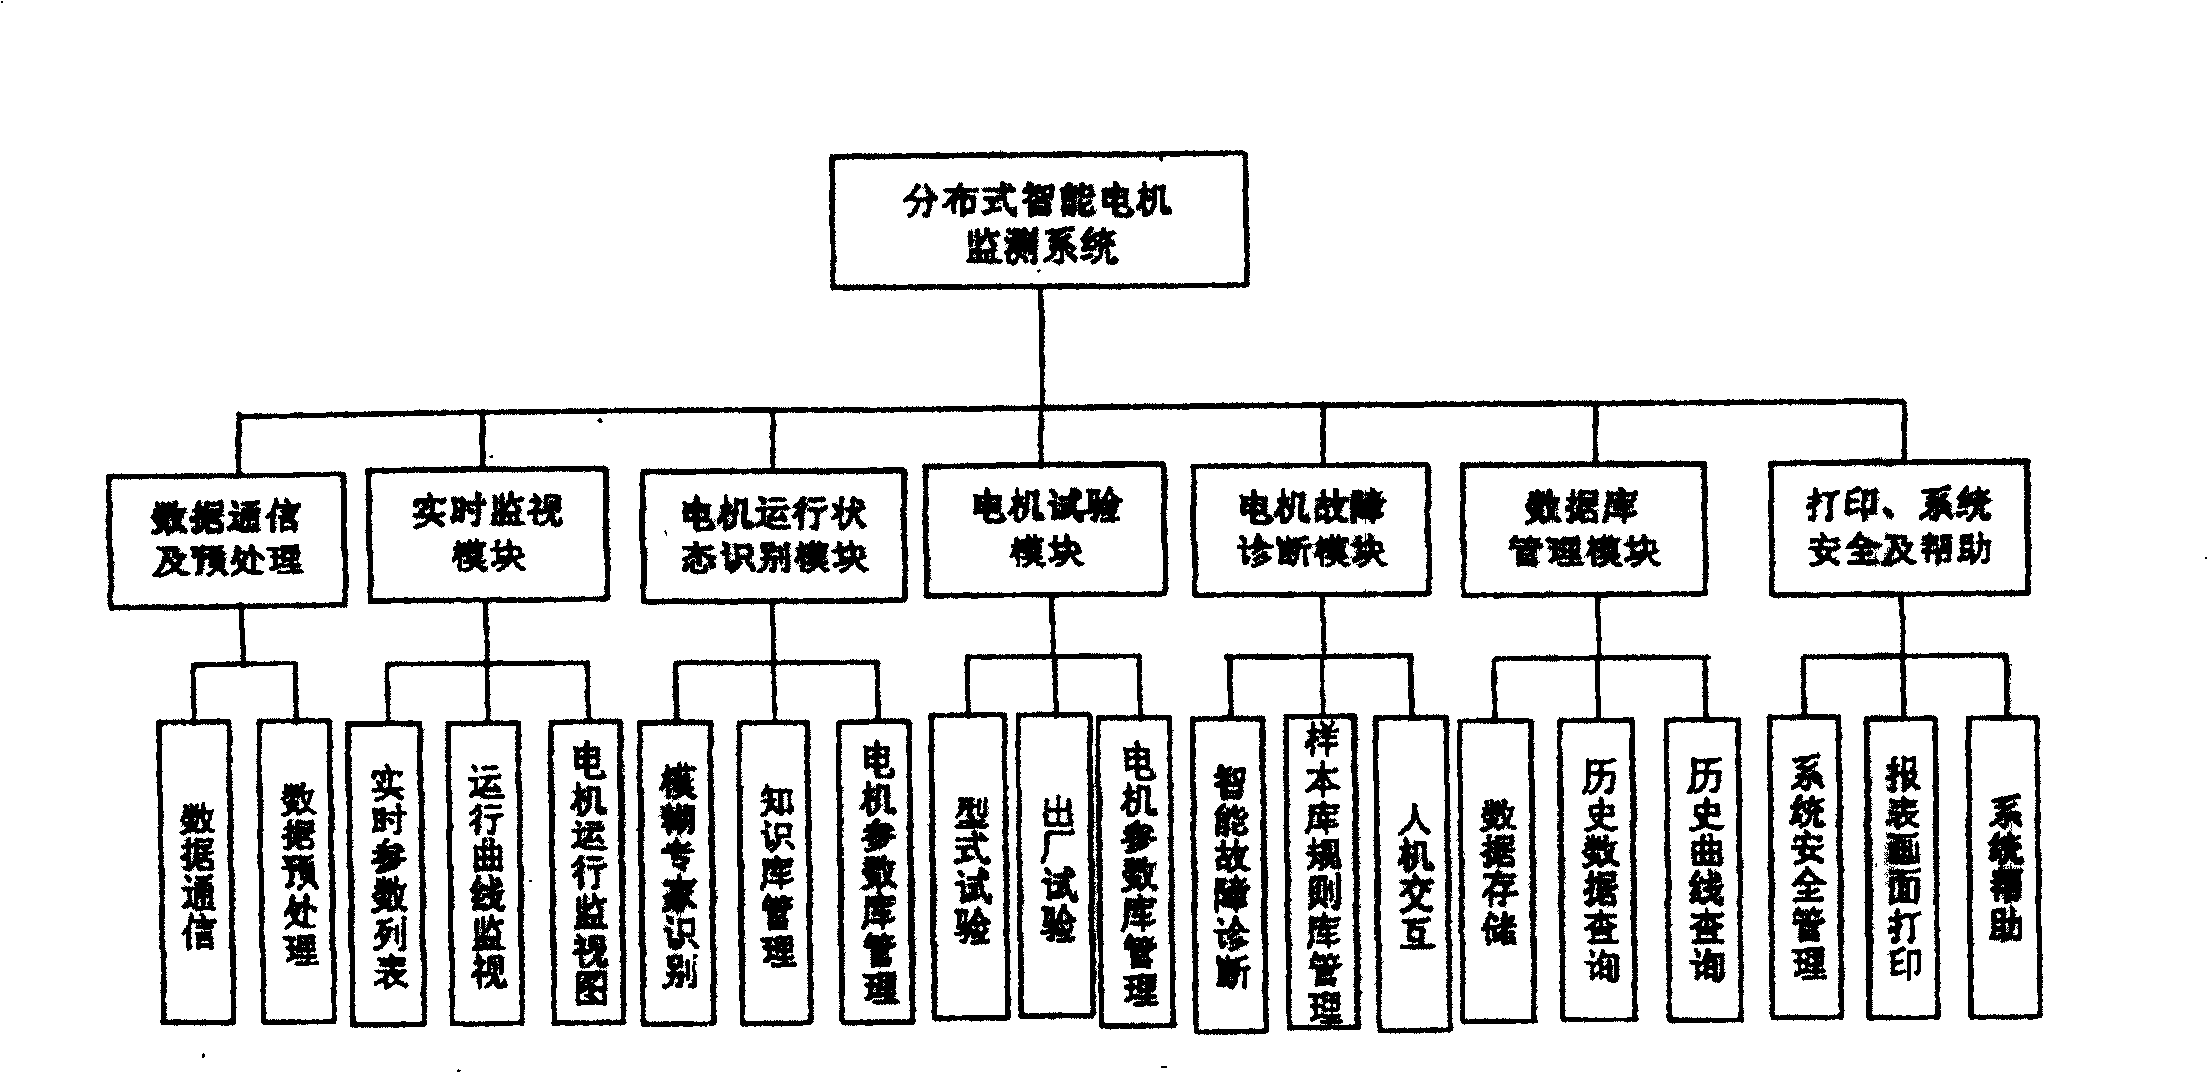 Distributed intelligent monitoring system for motor